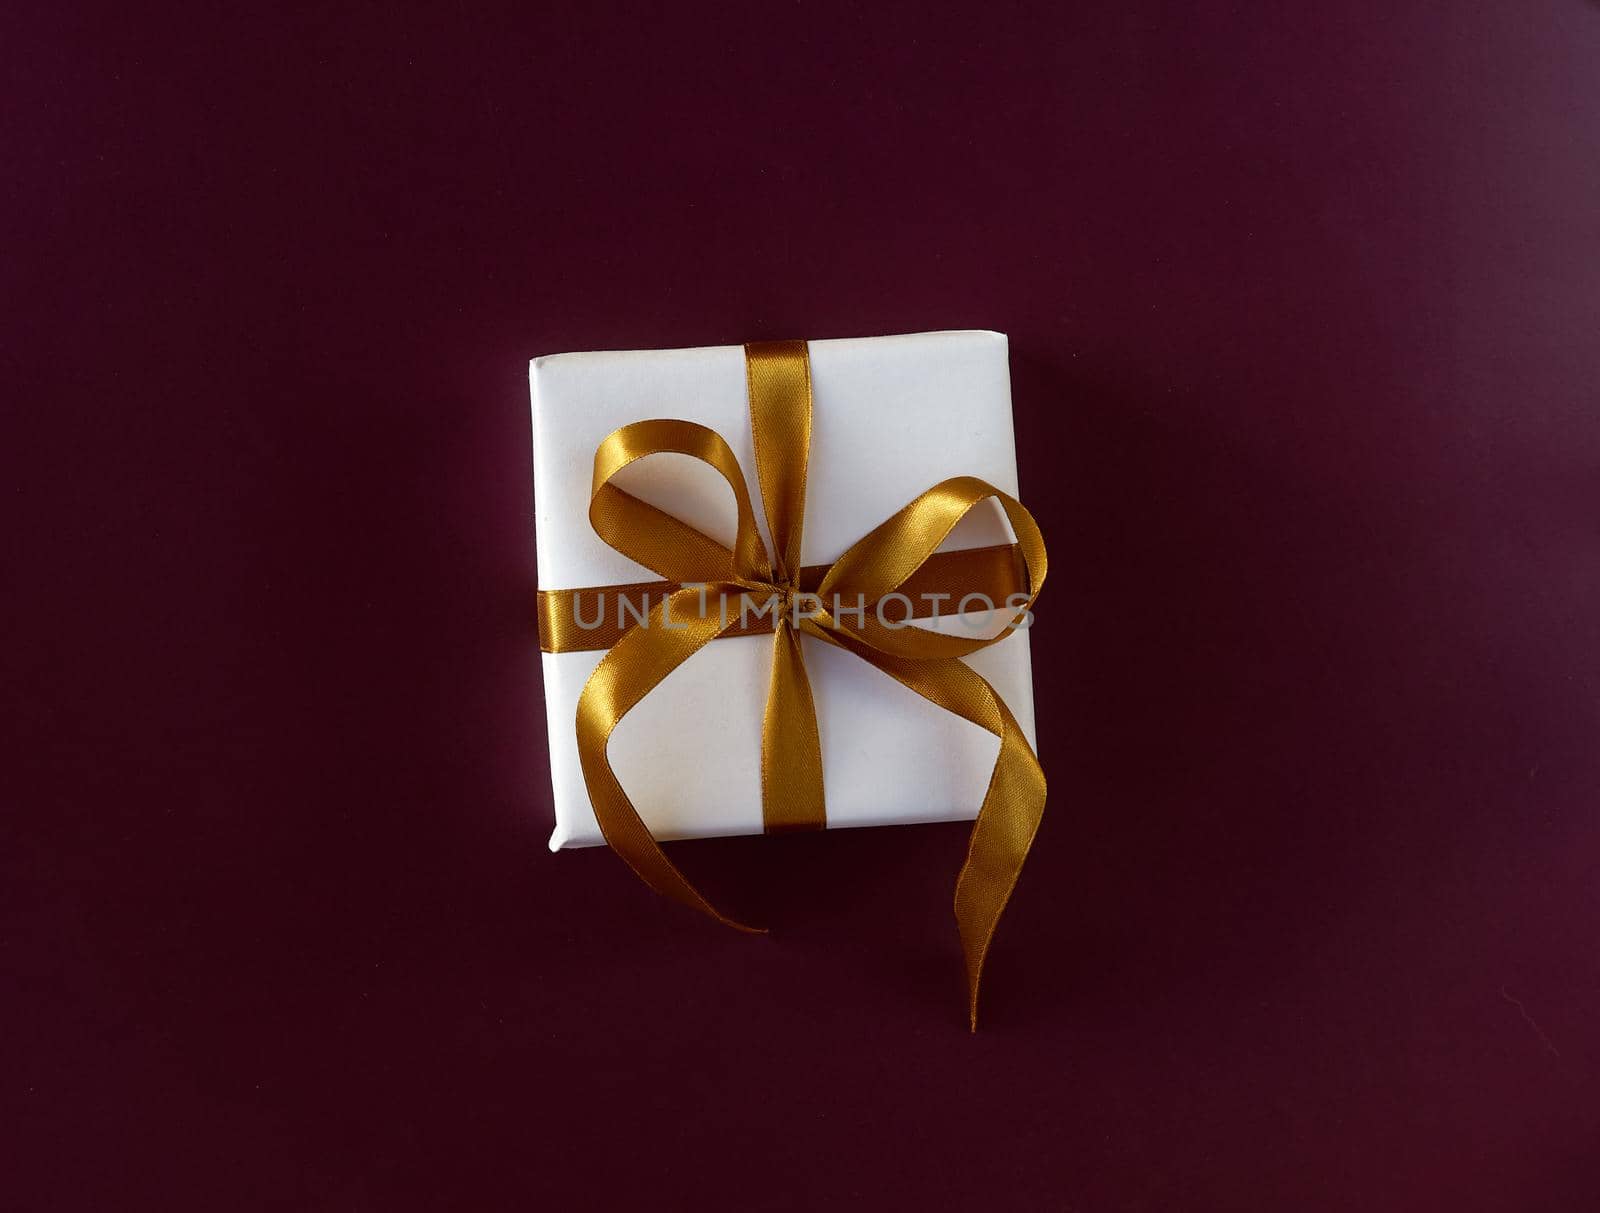 Gift box wrapped in white paper with a golden bow on festive violet background. Copyspace for your text. Flat lay style. Christmas, New Year or birthday celebration concept. Web element for postcard